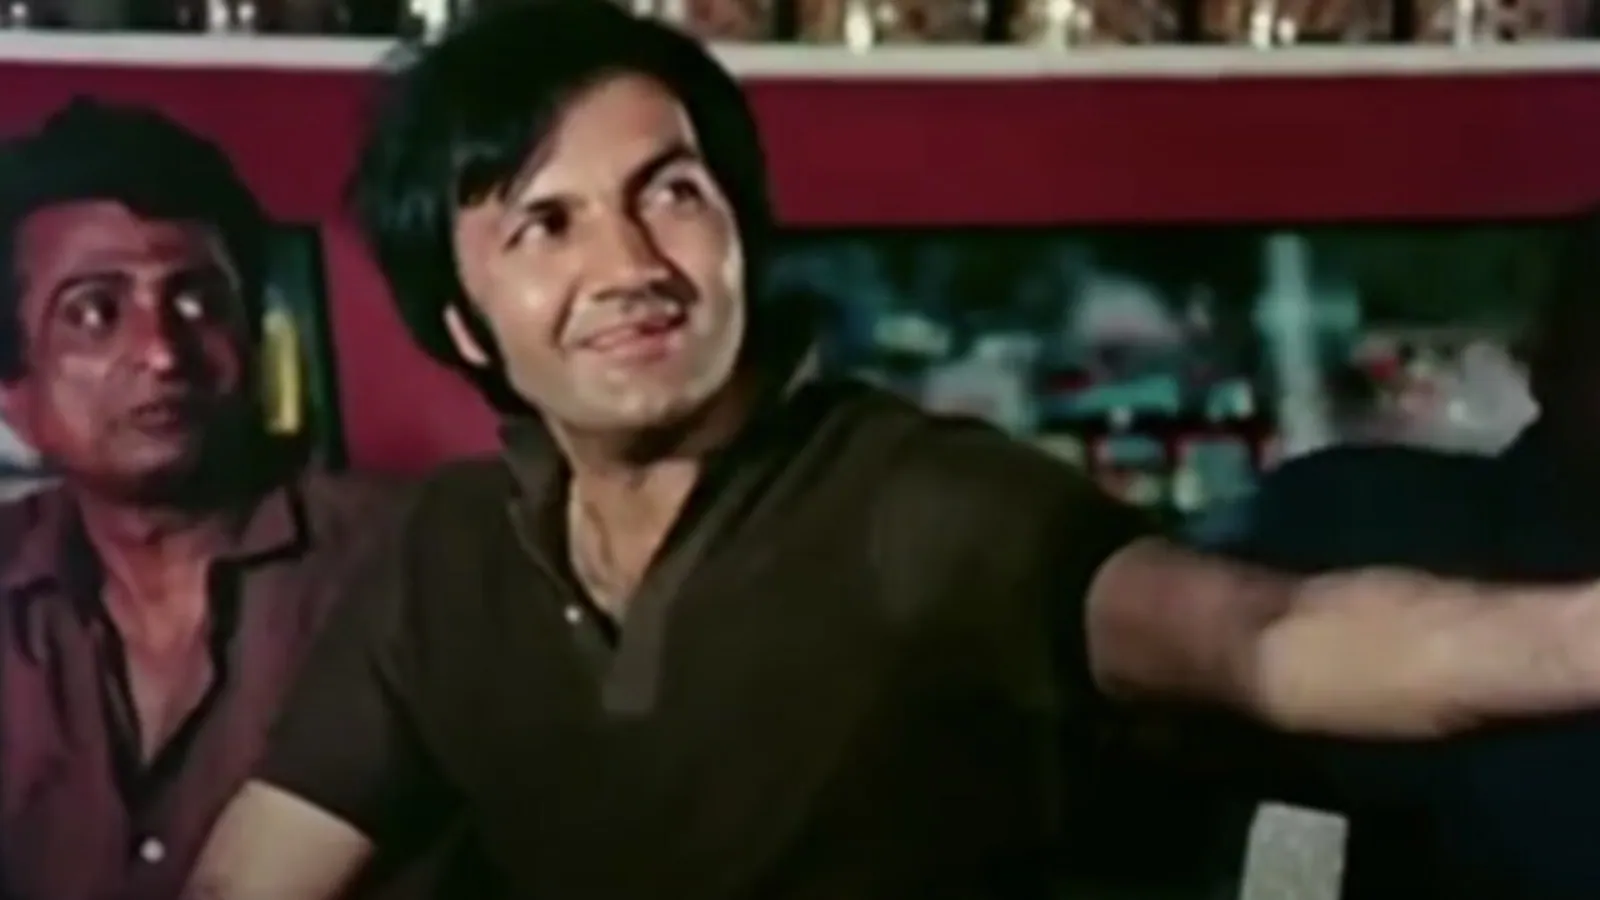 Prem Chopra with his famous dialogue from the movie bobby